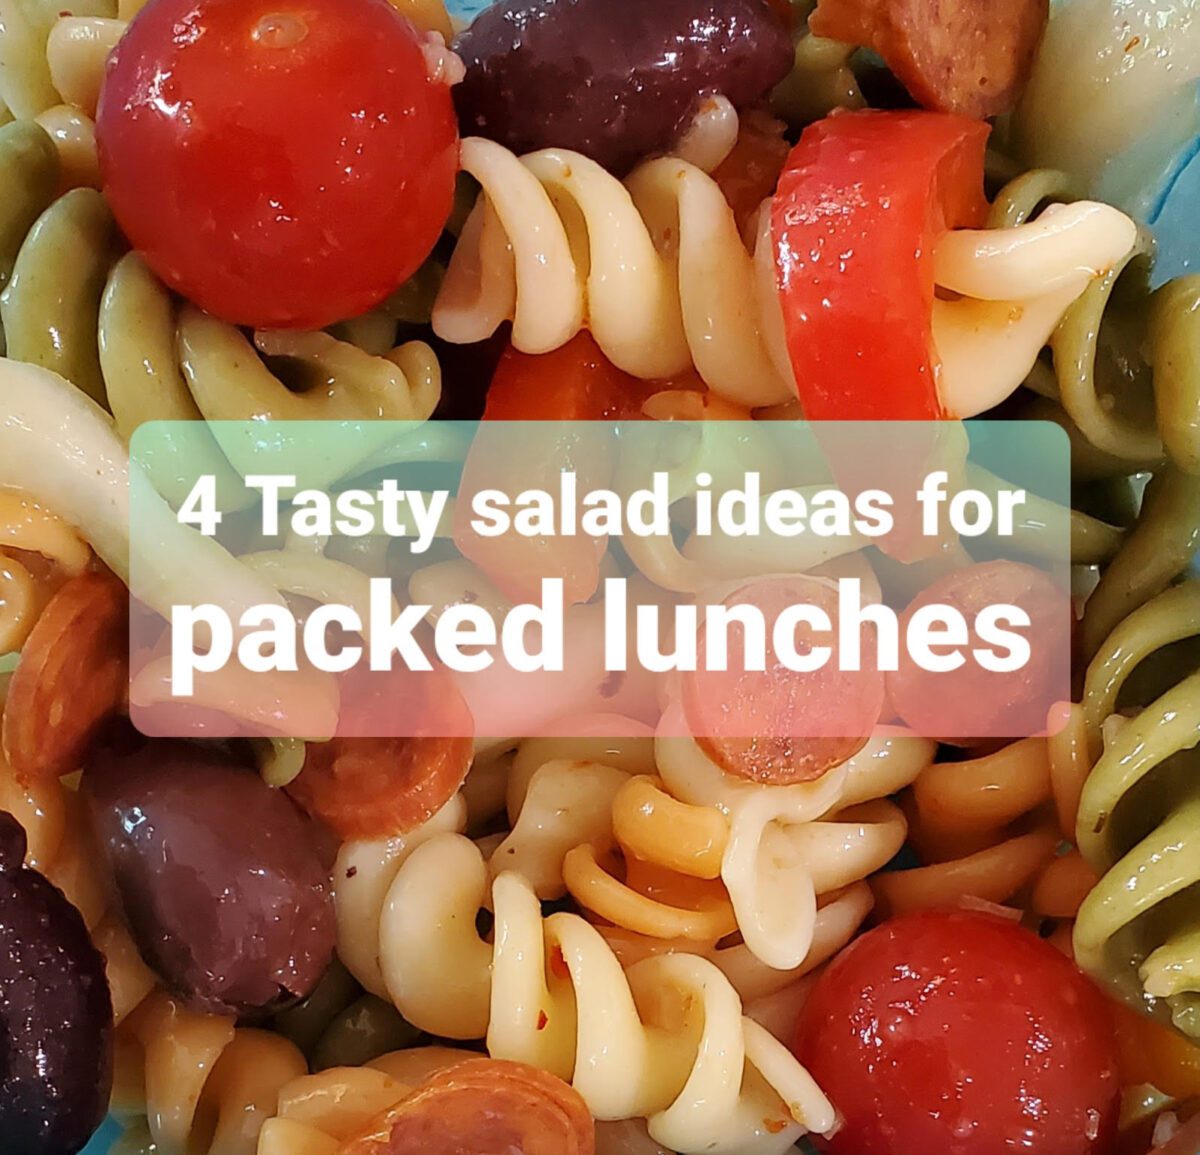 4 tasty salad ideas for packed lunches